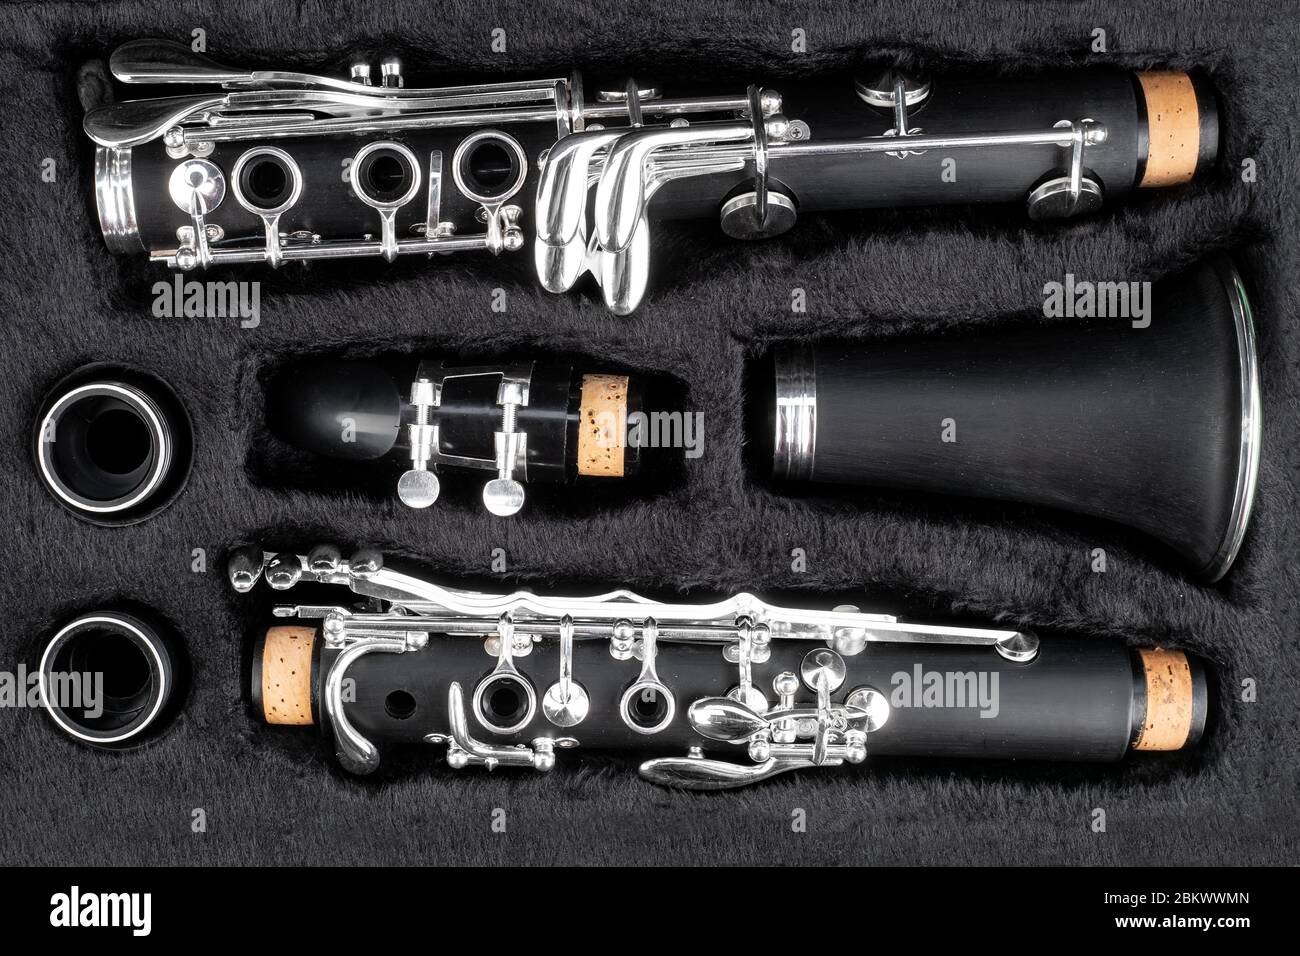 black clarinet  silver wooden woodwind musical brass instrument in pieces parts in music case. classic orchestra symphony background. Stock Photo